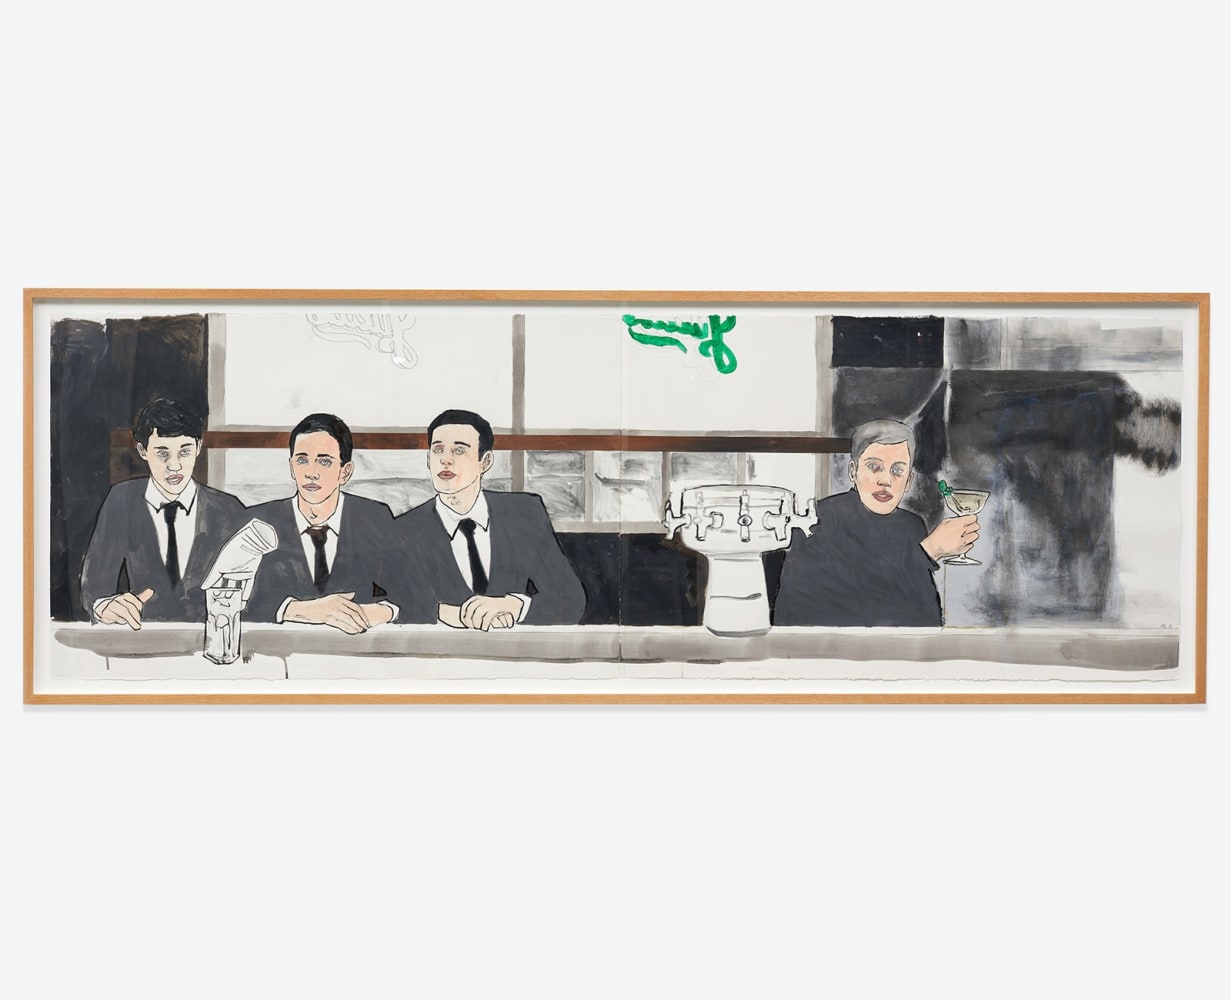 HERNAN BAS

Sip In (final grouping), 2019

Acrylic, charcoal, and graphite on paper

26 x 80.5 inches (paper)

66 x 204.5 cm

29.5 x 84 x 2 inches (framed)

74.9 x 213.4 x 5.1 cm